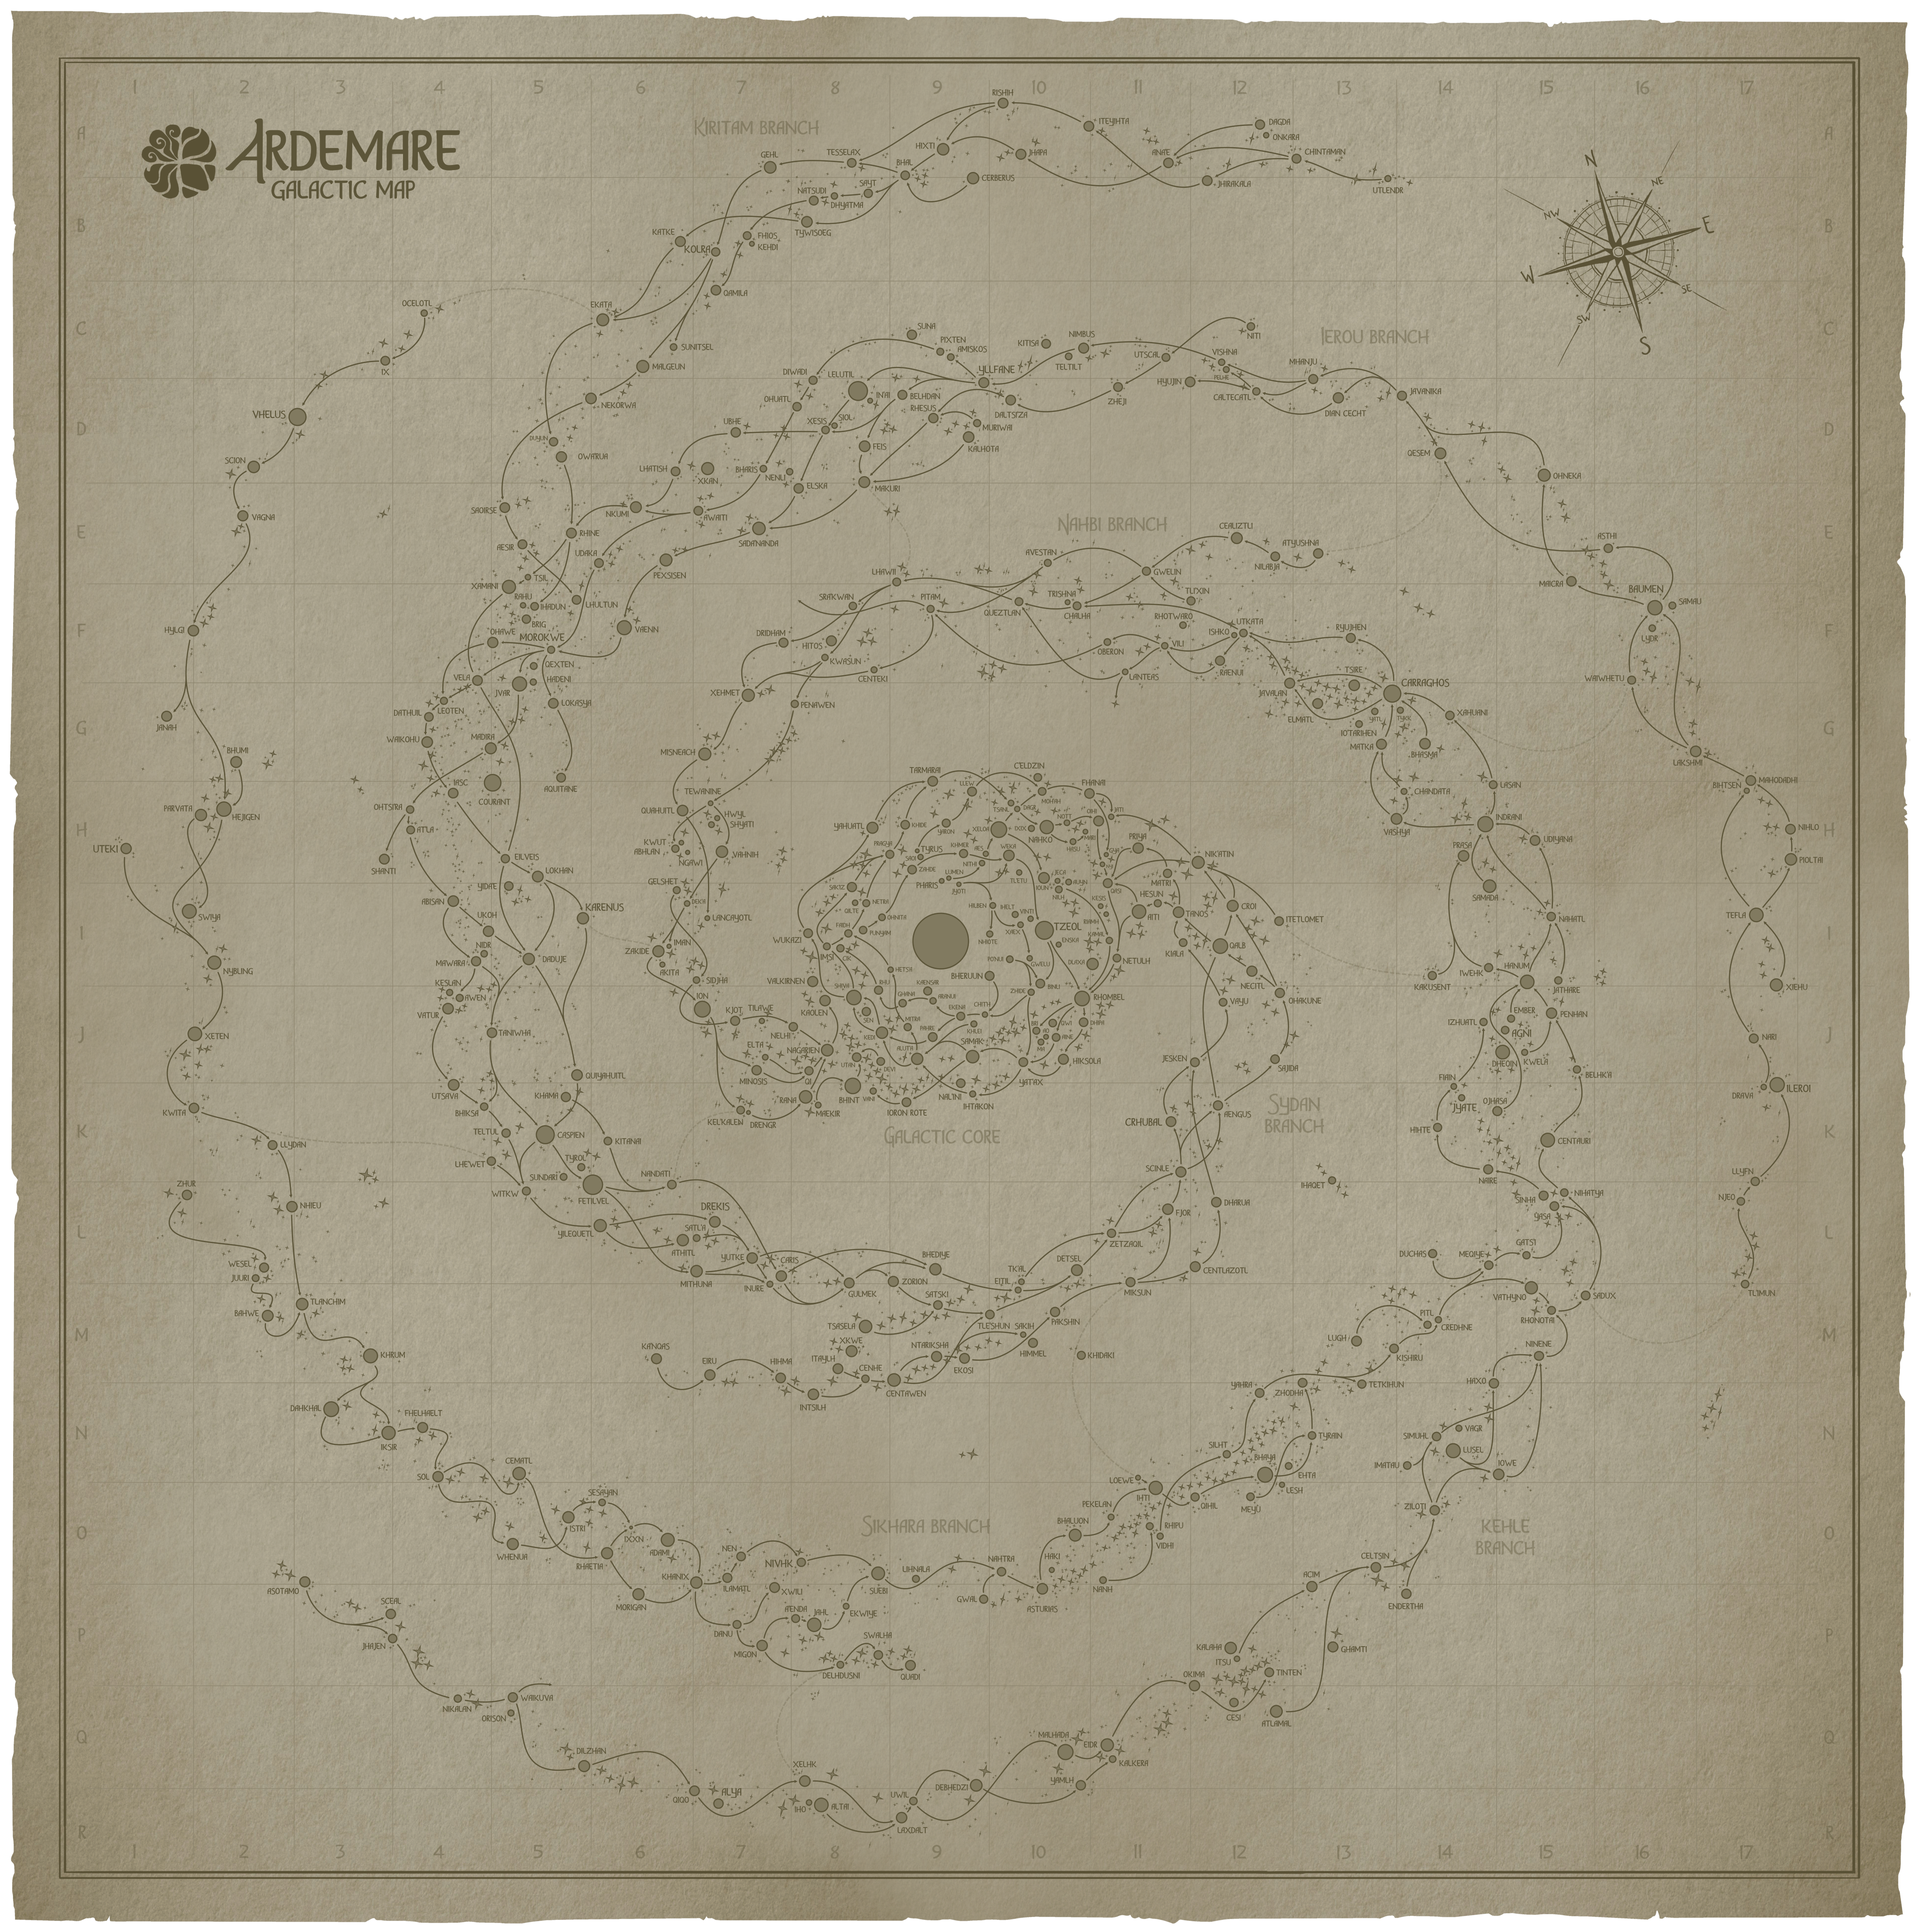 A paper map of the Ardemare galaxy, a spiral galaxy with several arms and roughly 500 planetary star systems and many times more stars without planets